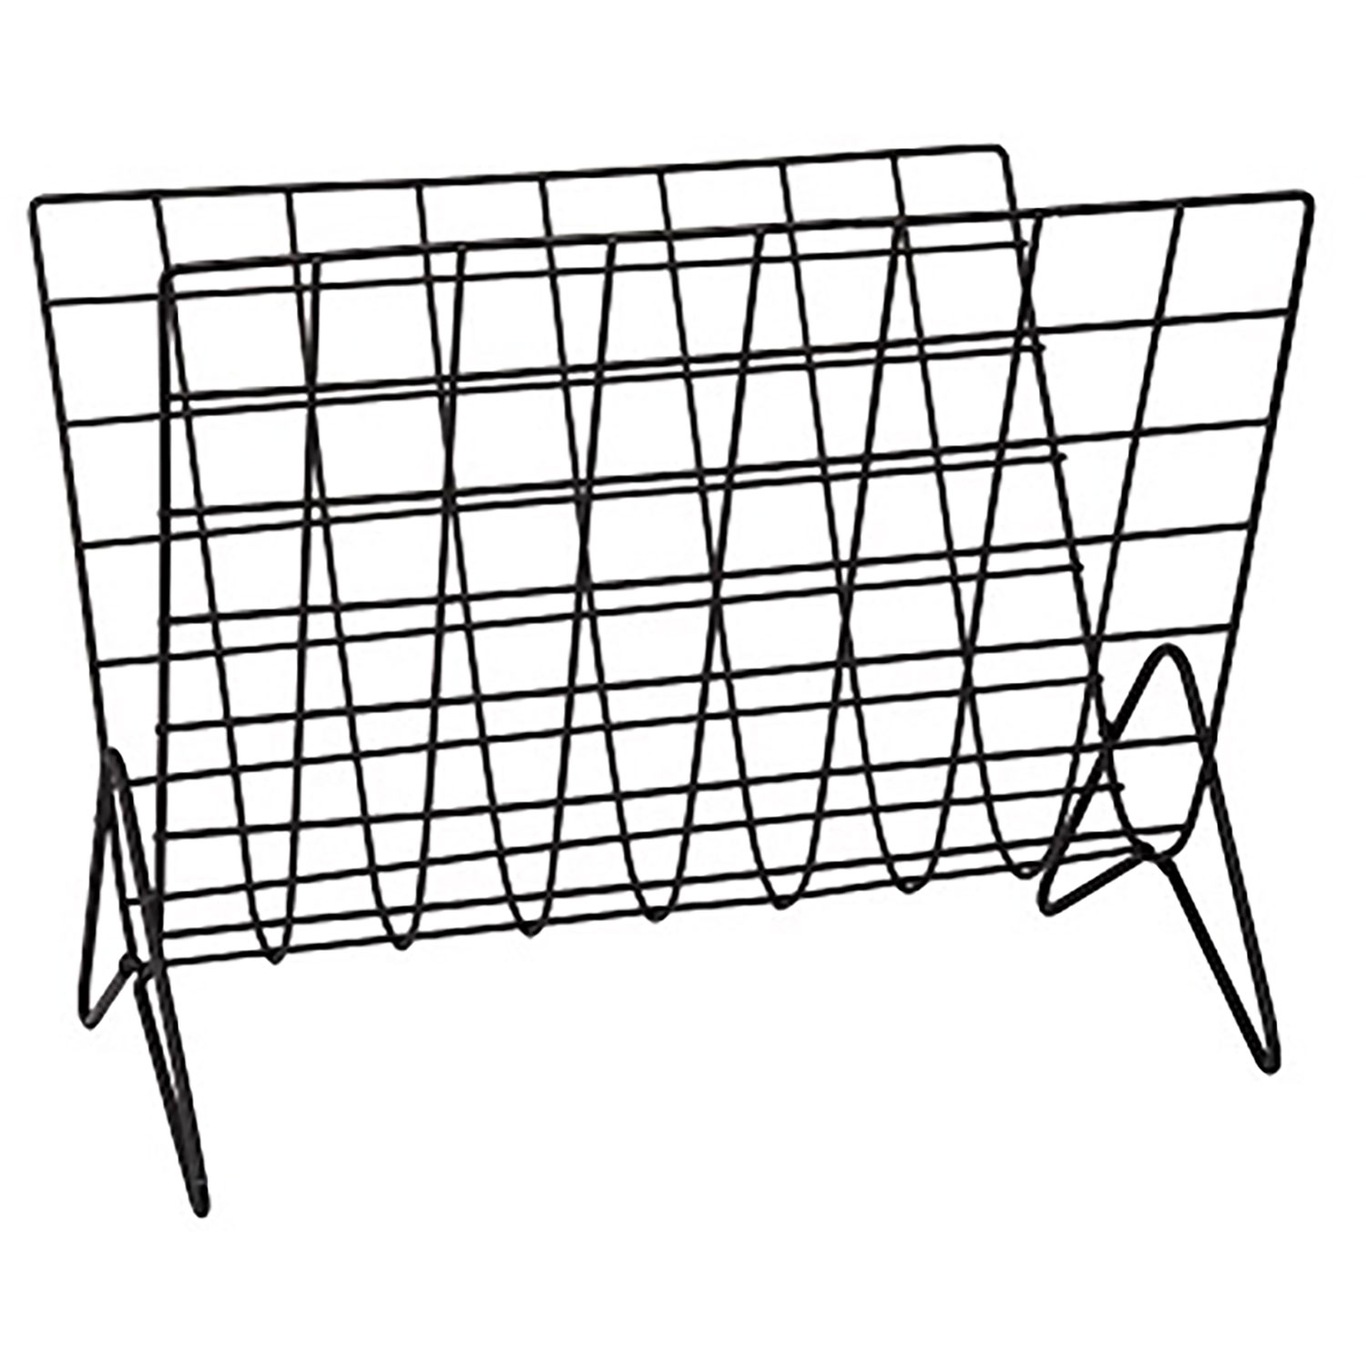 Aneby newspaper stand Black Forging wire